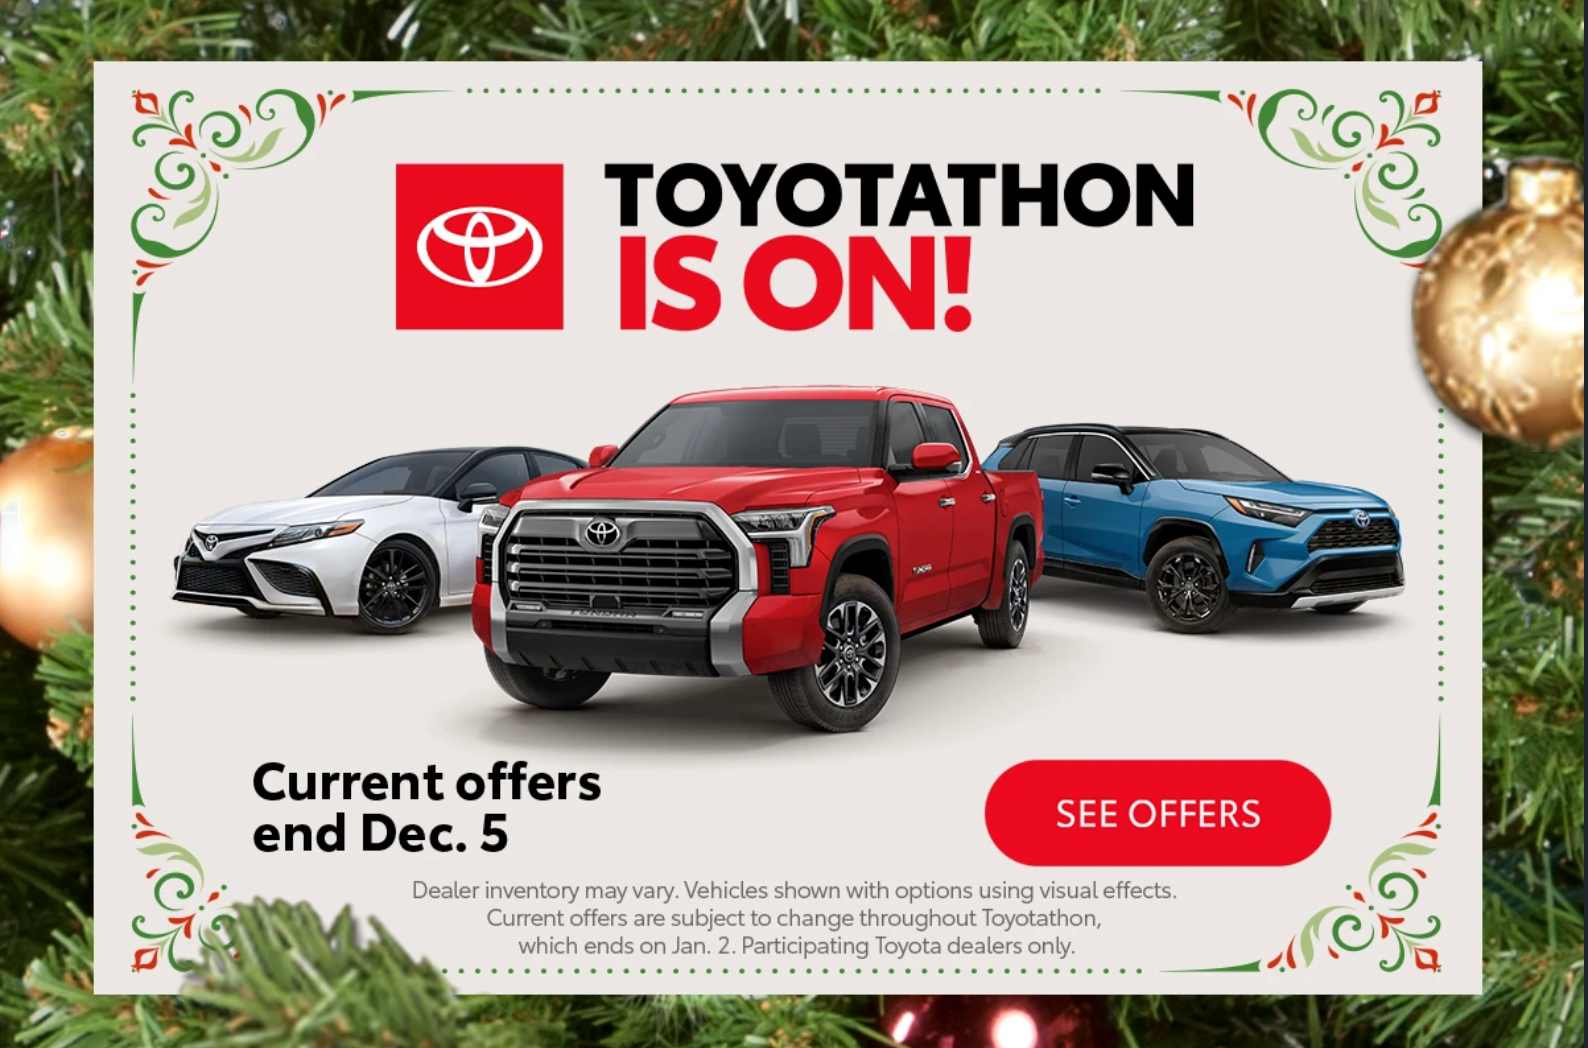 Toyotathon is On! These great deals and offers are extended until December 5!